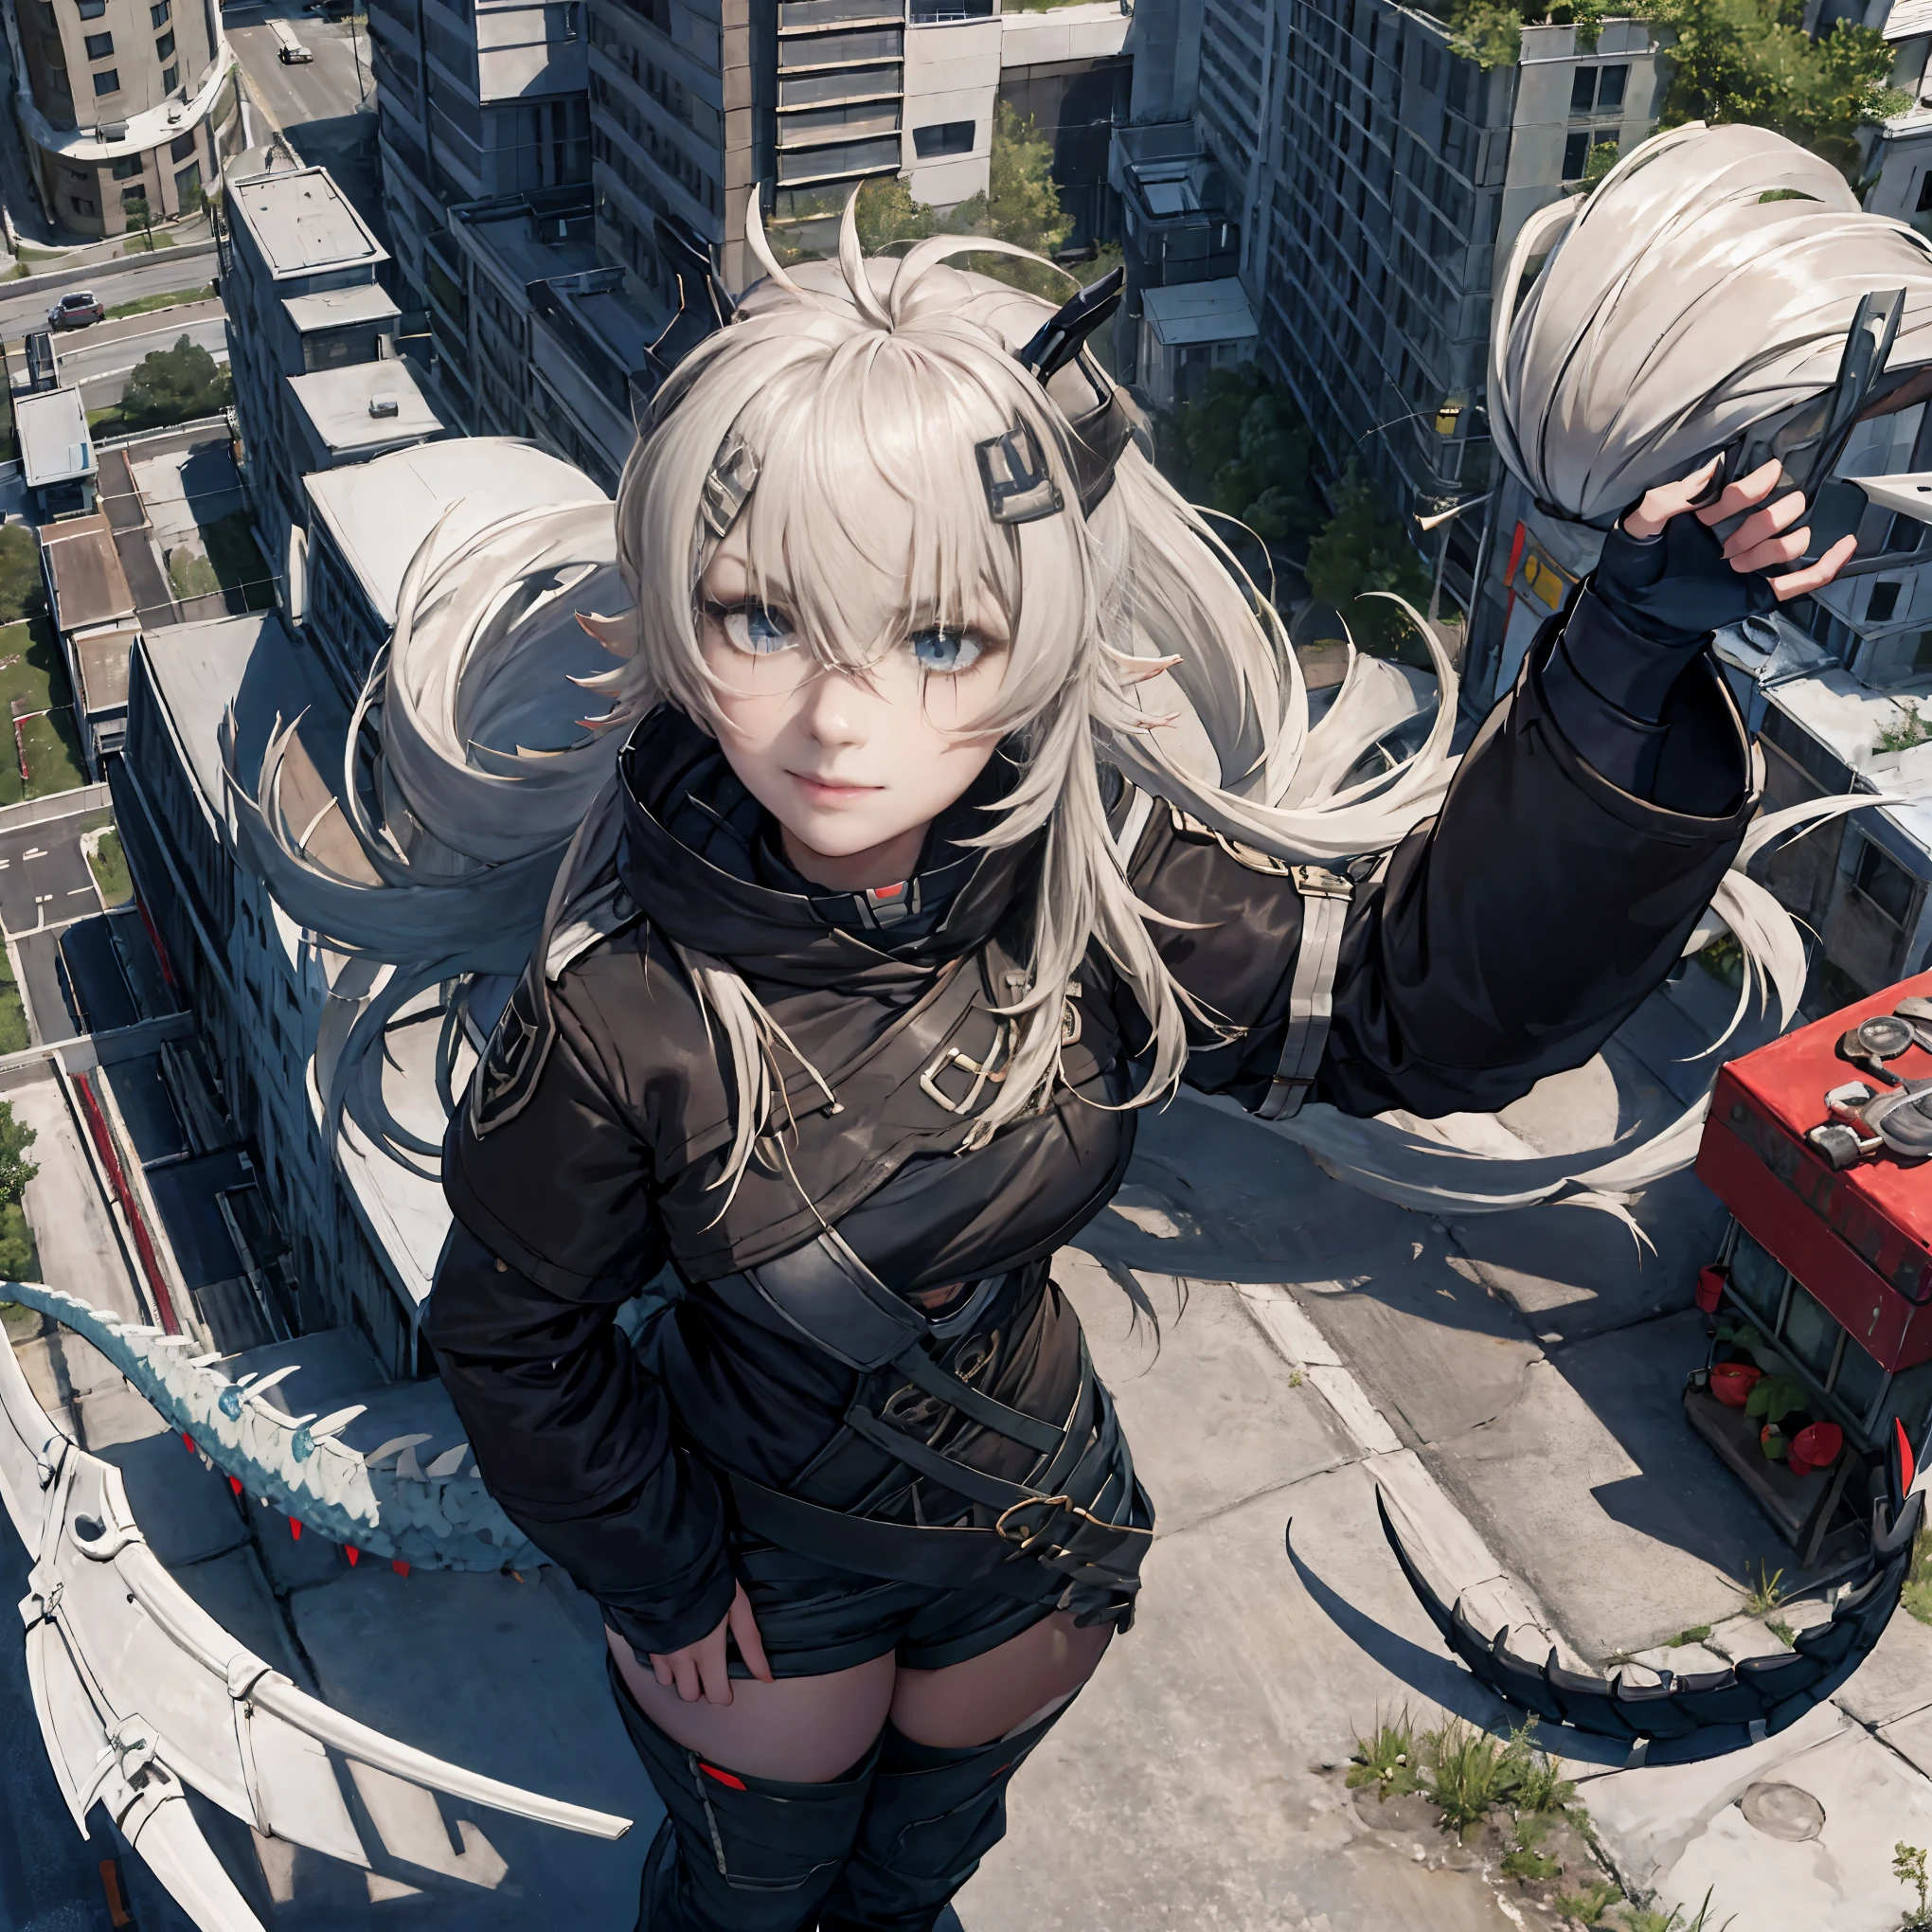 masterpiece, shoulder length white hair, female,2 white fox ears, teenage girl, body,, white scale dragon tail, military boots,black leggings, military combat pants, black T-shirt, white jacket open, medium size chest, detailed blue eyes,solo female,1 dragon tail, tomboyish, thick dragon tail, white scales, 2 dragon wings, white fluffy wings